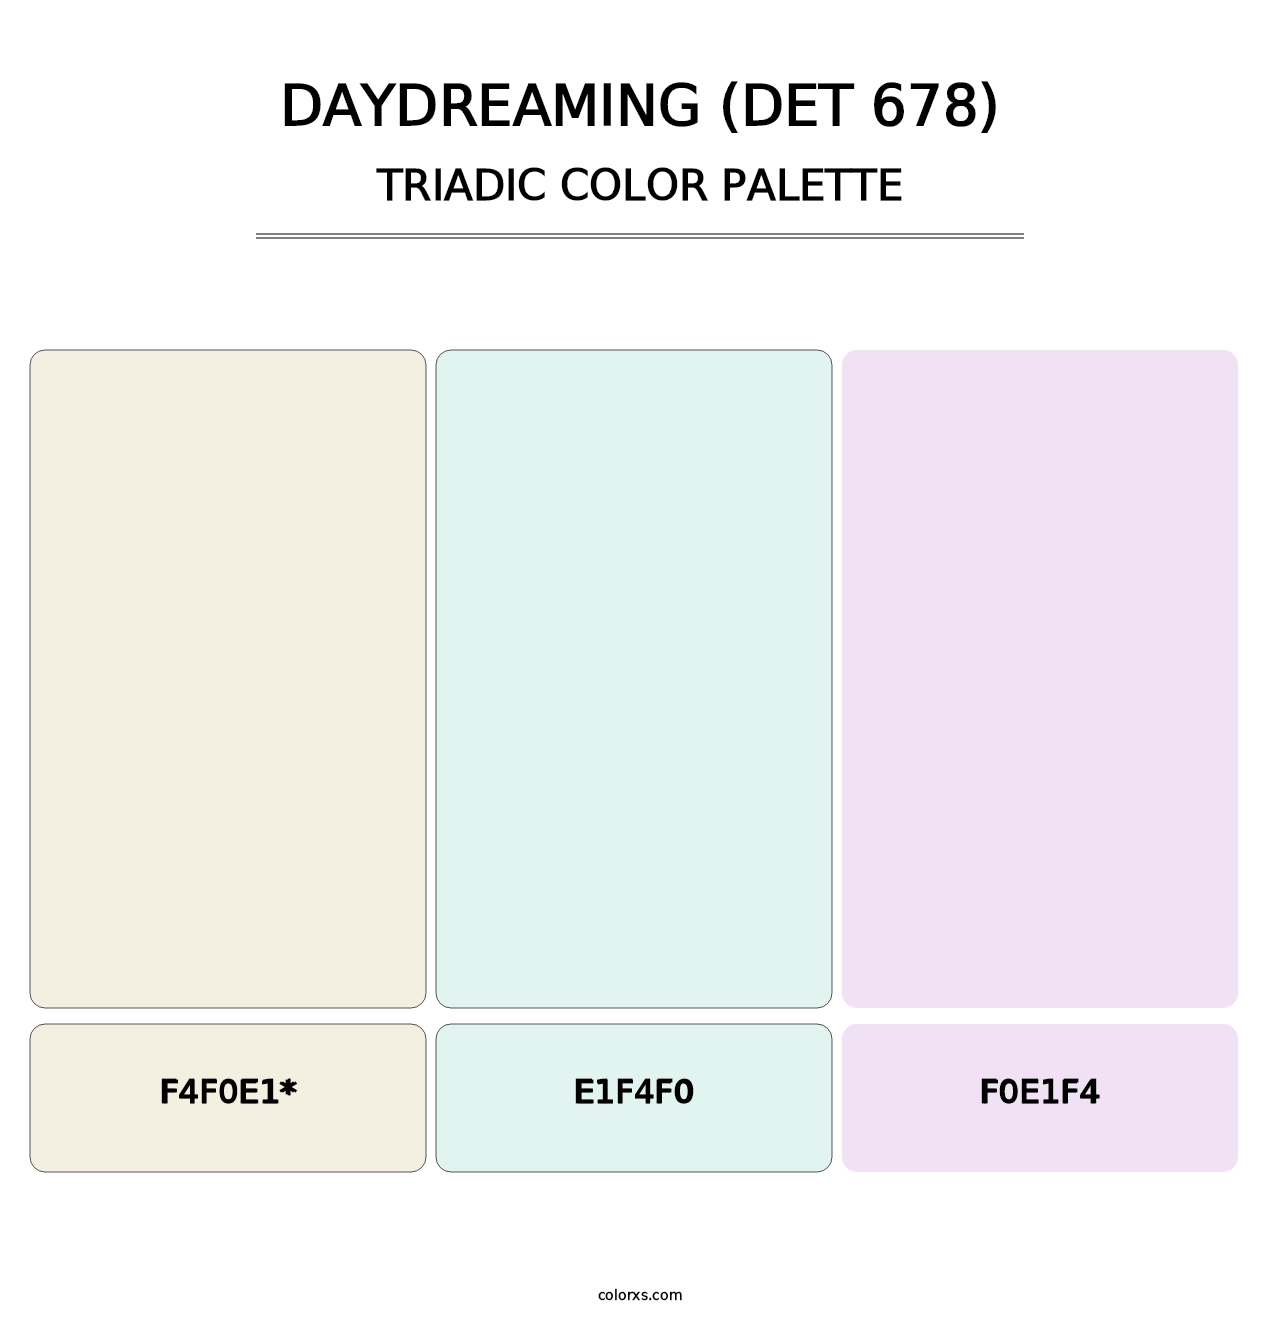 Daydreaming (DET 678) - Triadic Color Palette